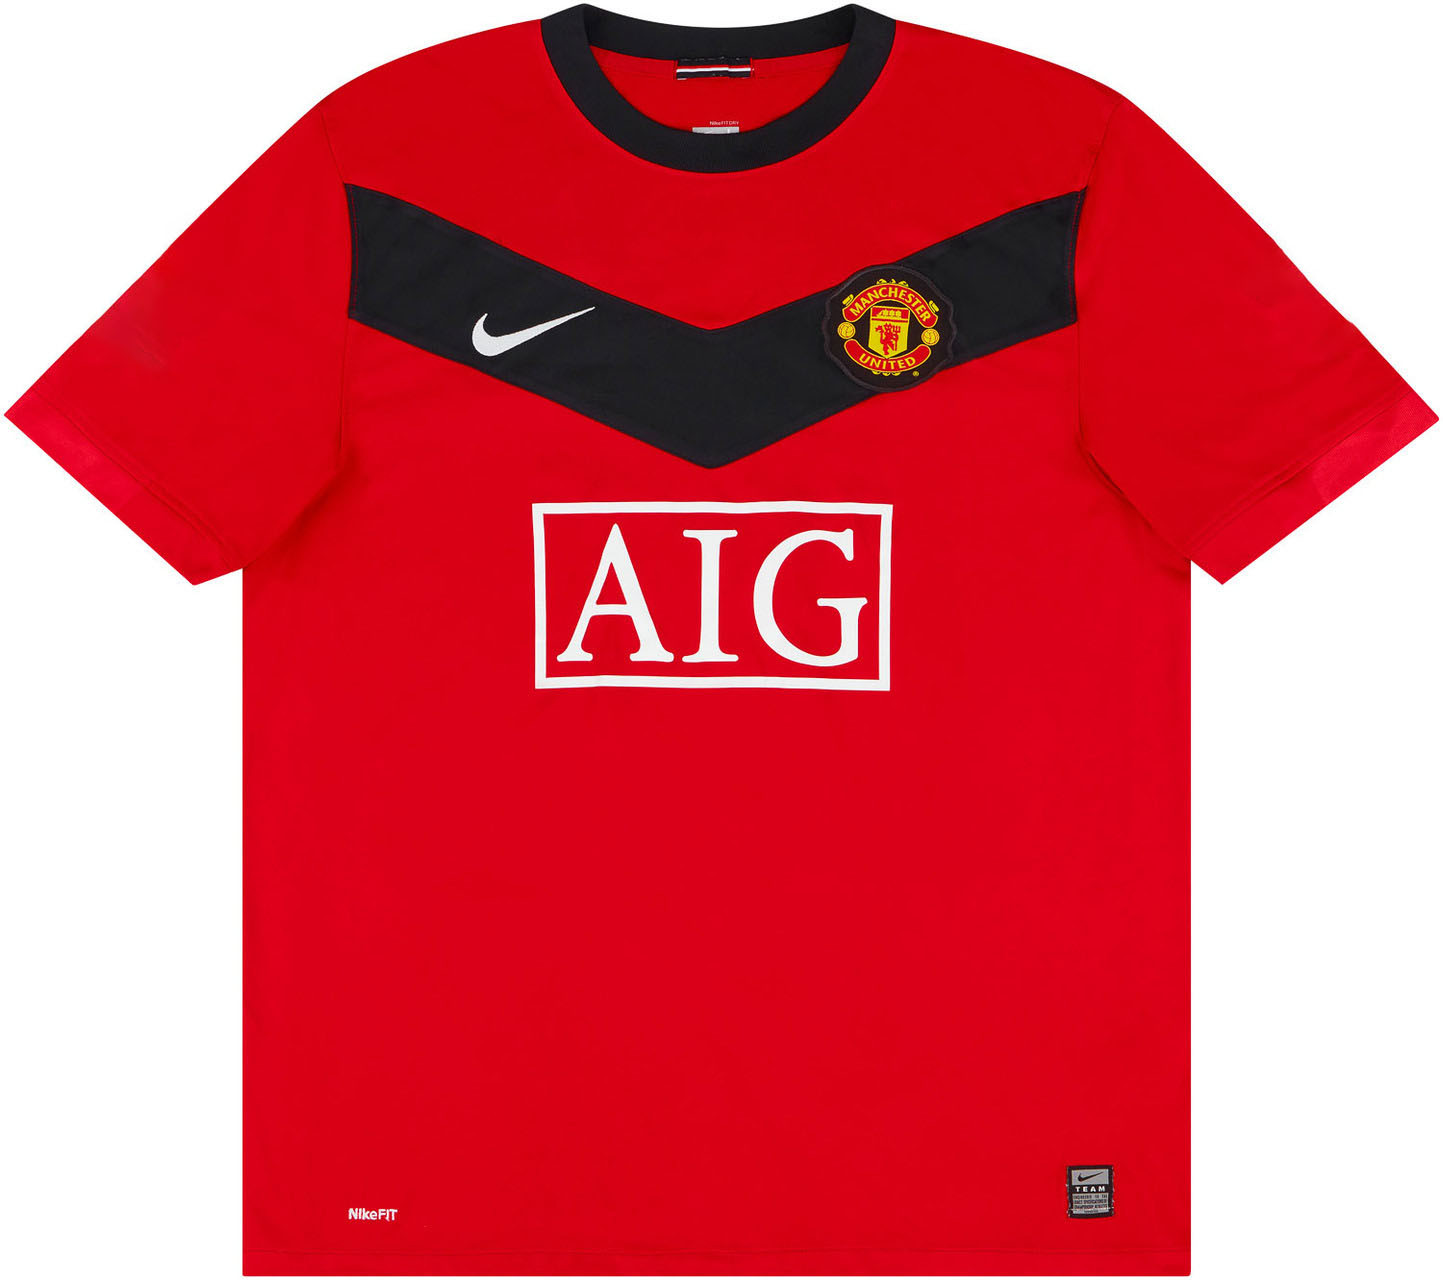 2009-10 Manchester United Home Shirt - 5/10 - ()